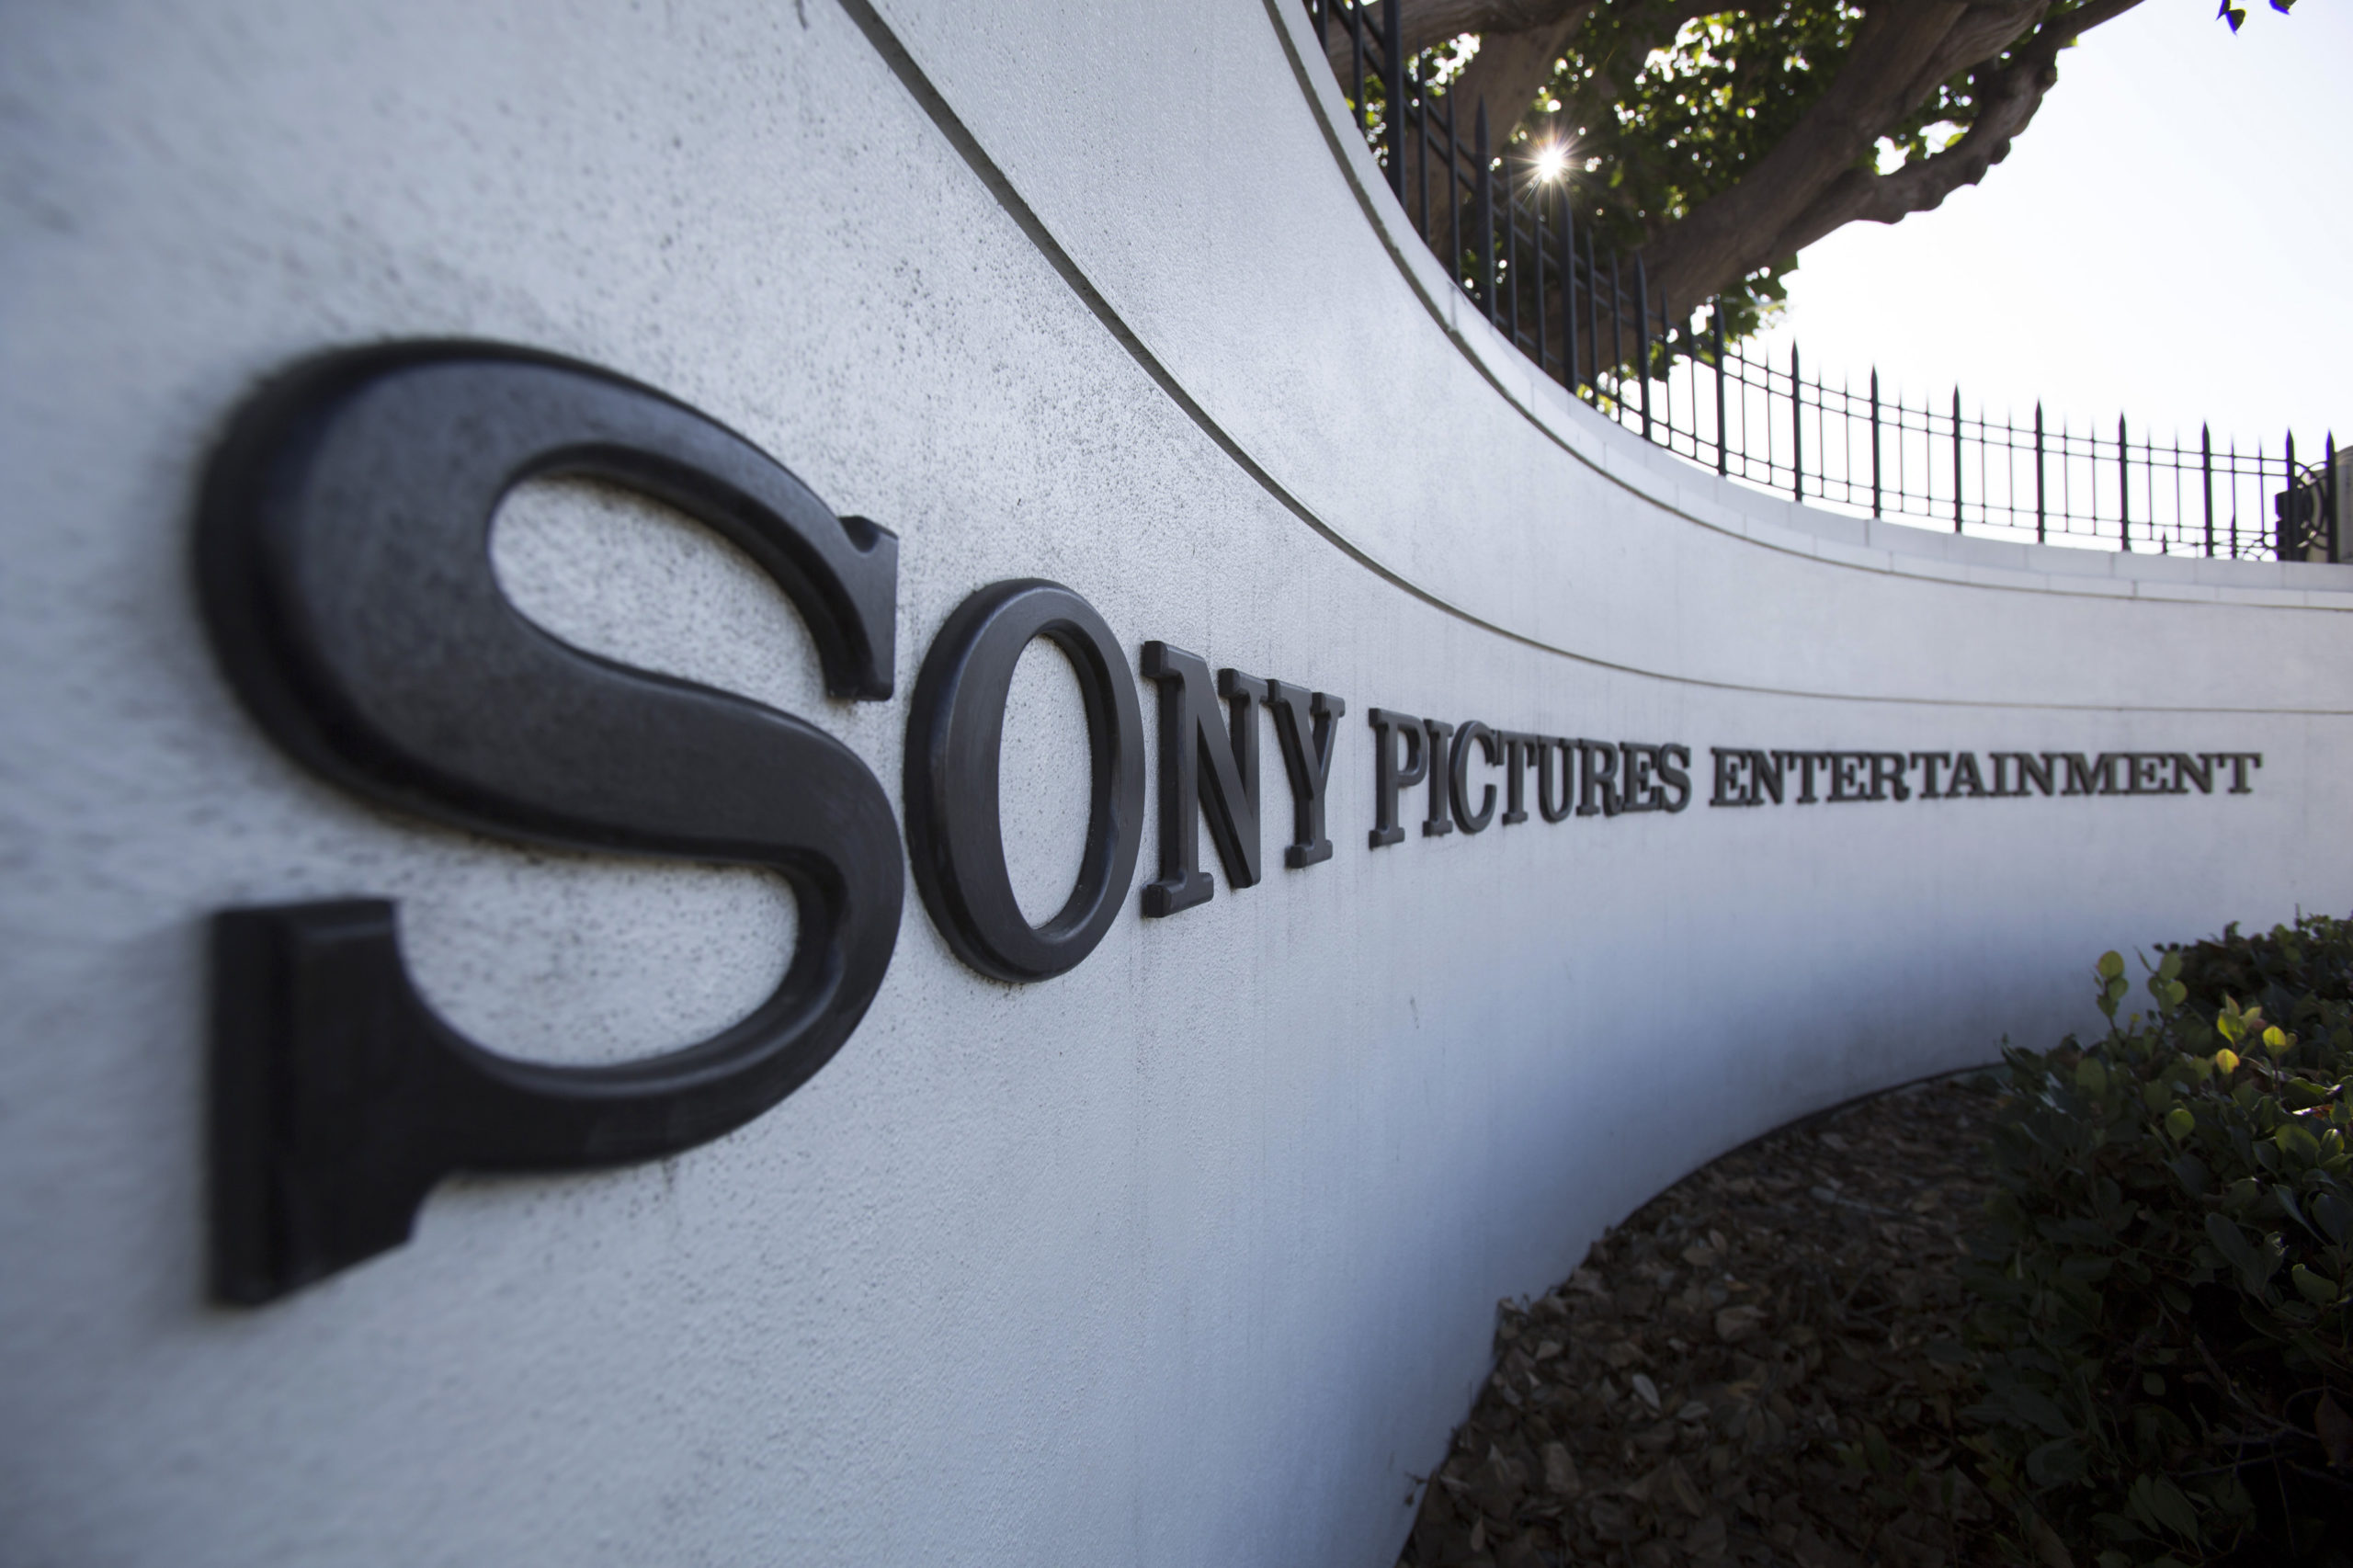  A logo is pictured outside Sony Pictures Studios in Culver City, California December 19, 2014. REUTERS/Mario Anzuoni